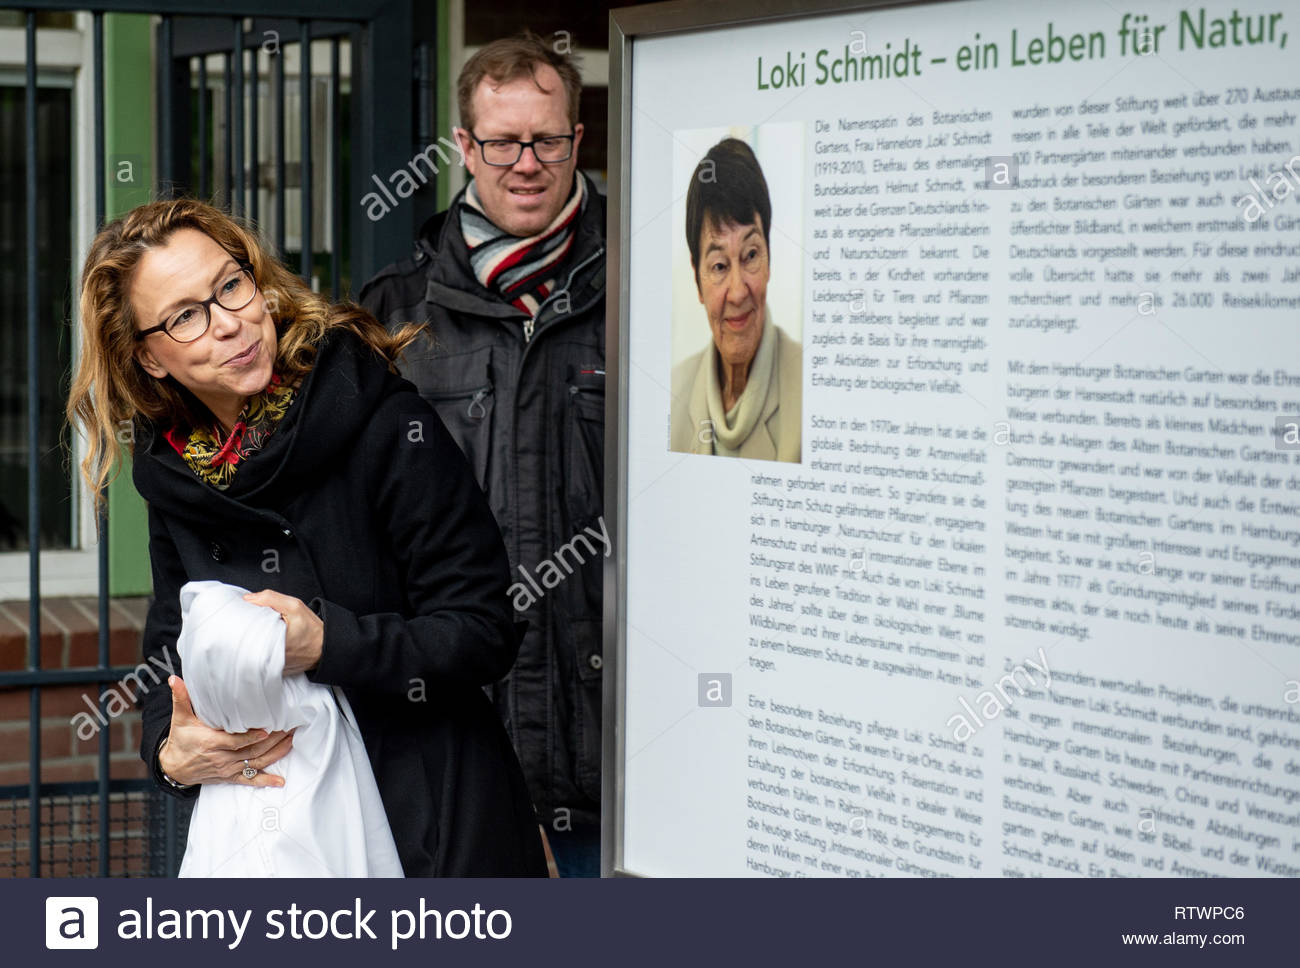 hamburg germany 03rd mar 2019 carola veit spd president of the hamburg parliament unveils a memorative plaque in honour of hamburgs honorary citizen loki schmidt who d in 2010 in the botanical garden a birthday matinee was held to memorate the life of schmidt as a conservationist who would have turned 100 on 03 march 2019 credit axel heimkendpaalamy live news RTWPC6